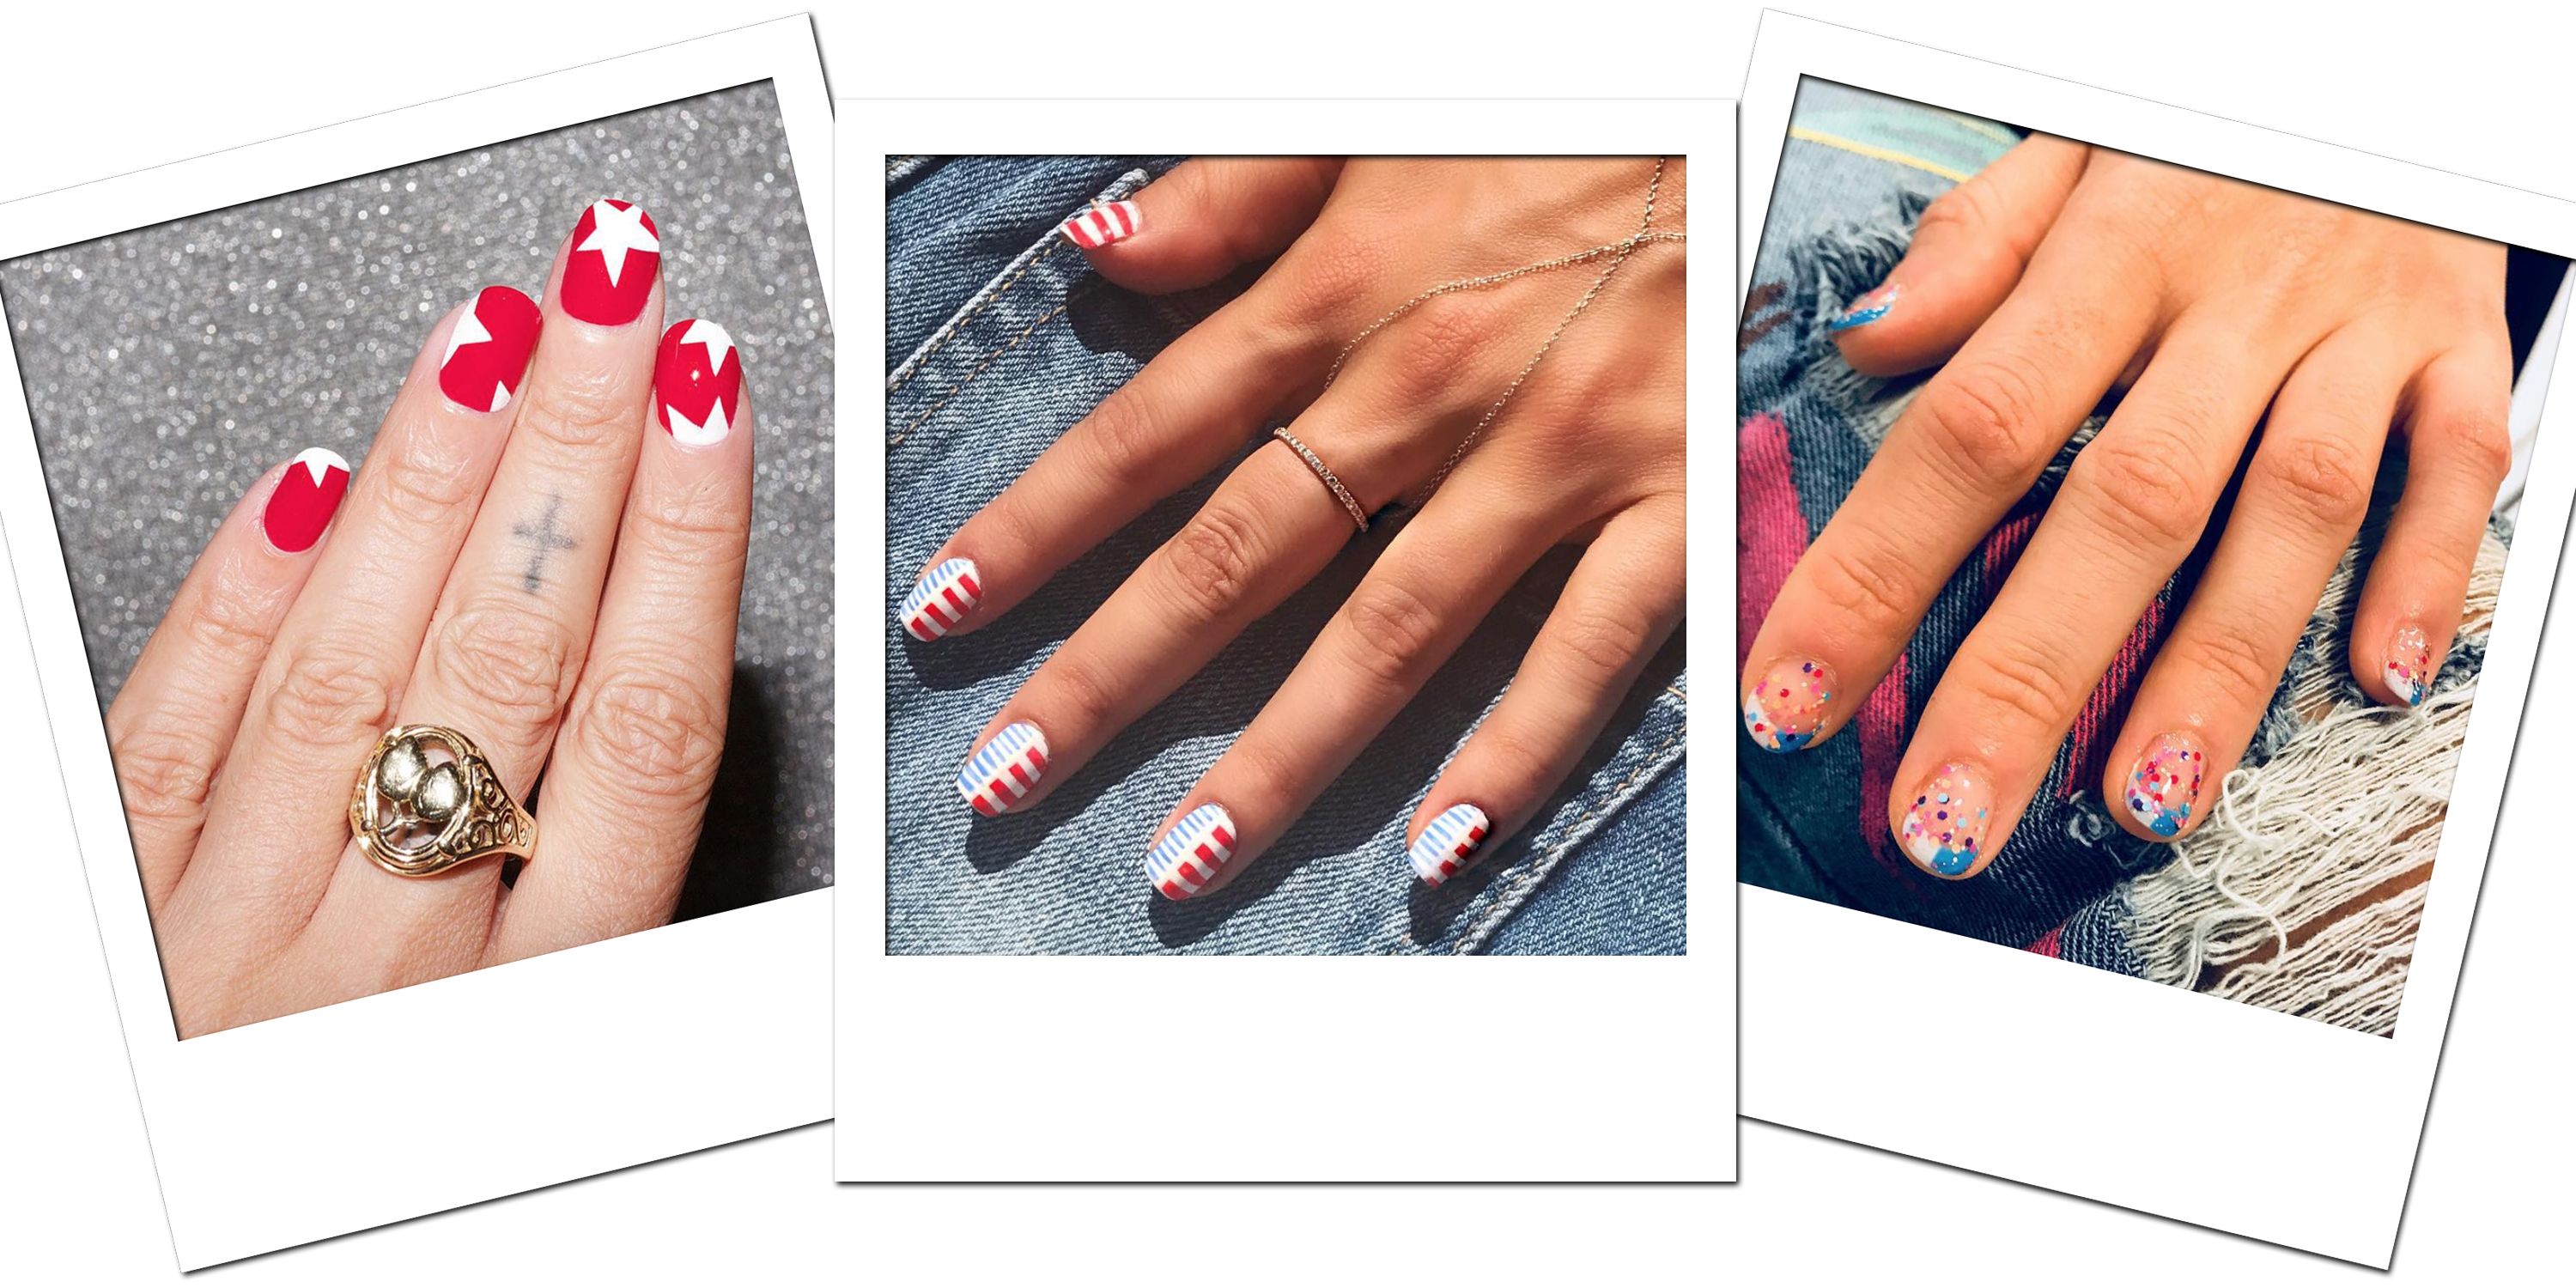 5. Creative DIY Nail Designs for the Fourth of July - wide 5